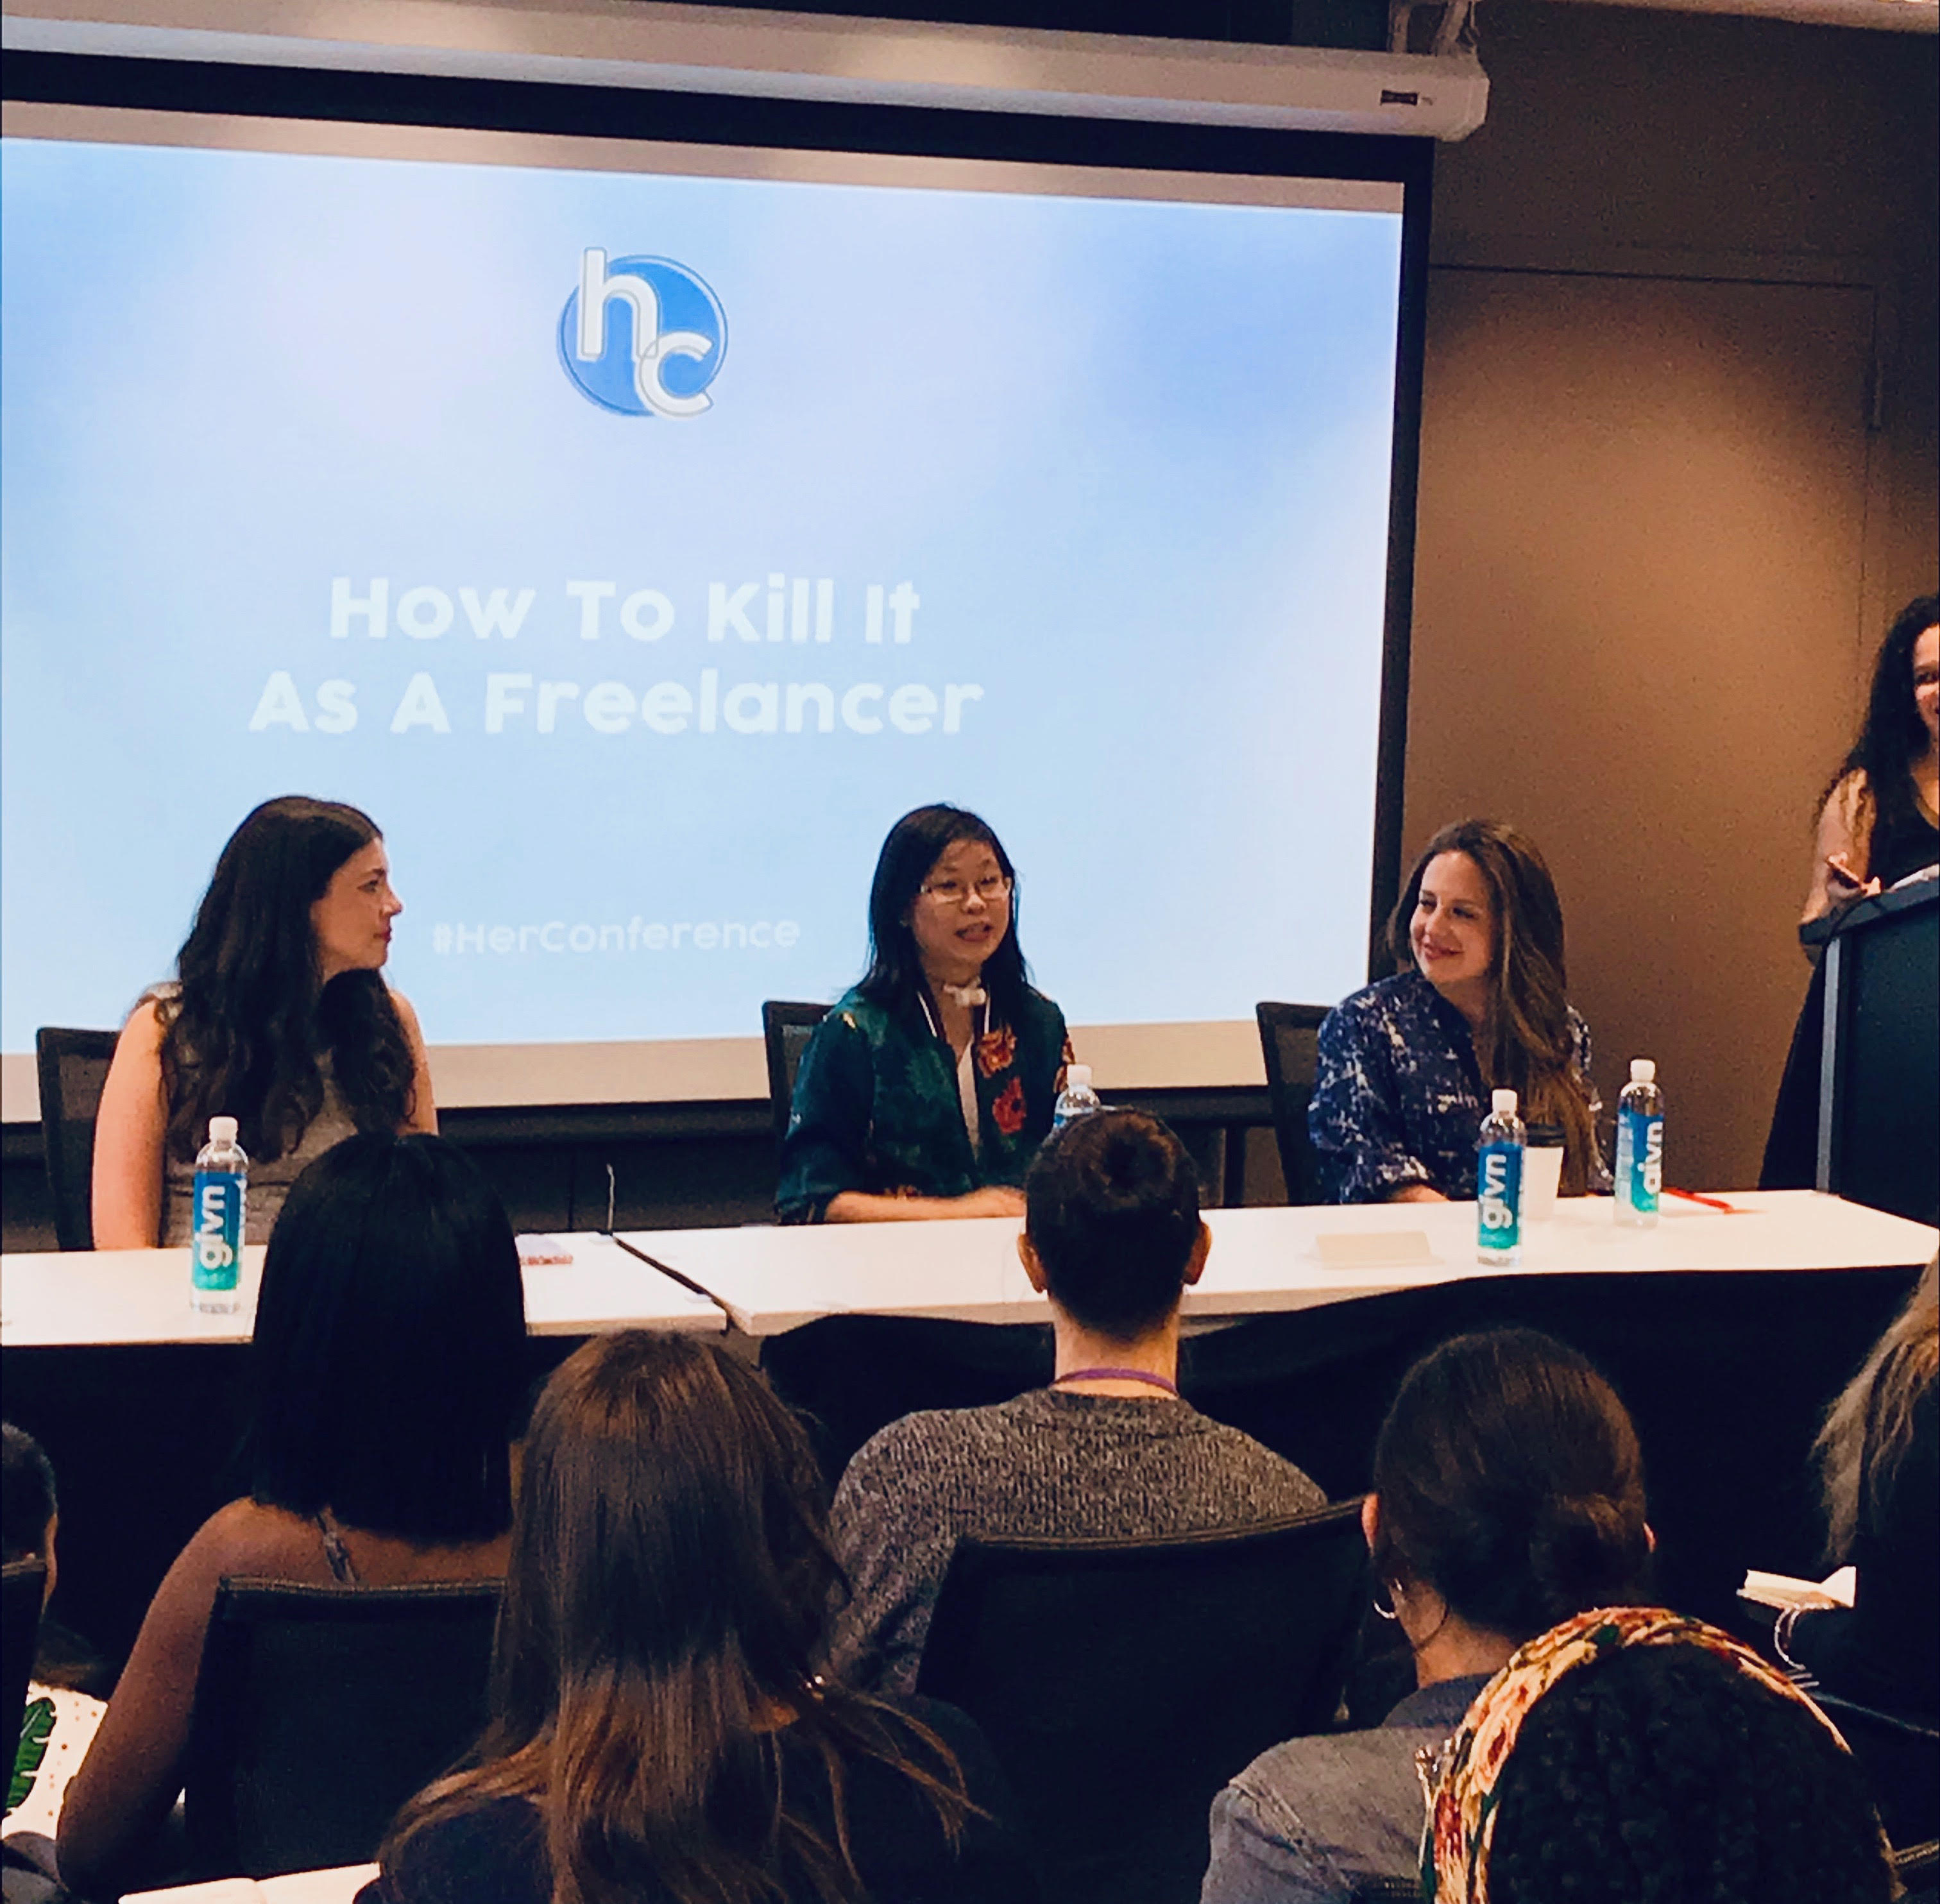 A Chinese woman with a trach tube is speaking on a panel with four other women at the HerCampus Conference in 2018. She's in front of a presentation titled, "How To Kill It As A Freelancer." Several audience members are sitting in the foreground.